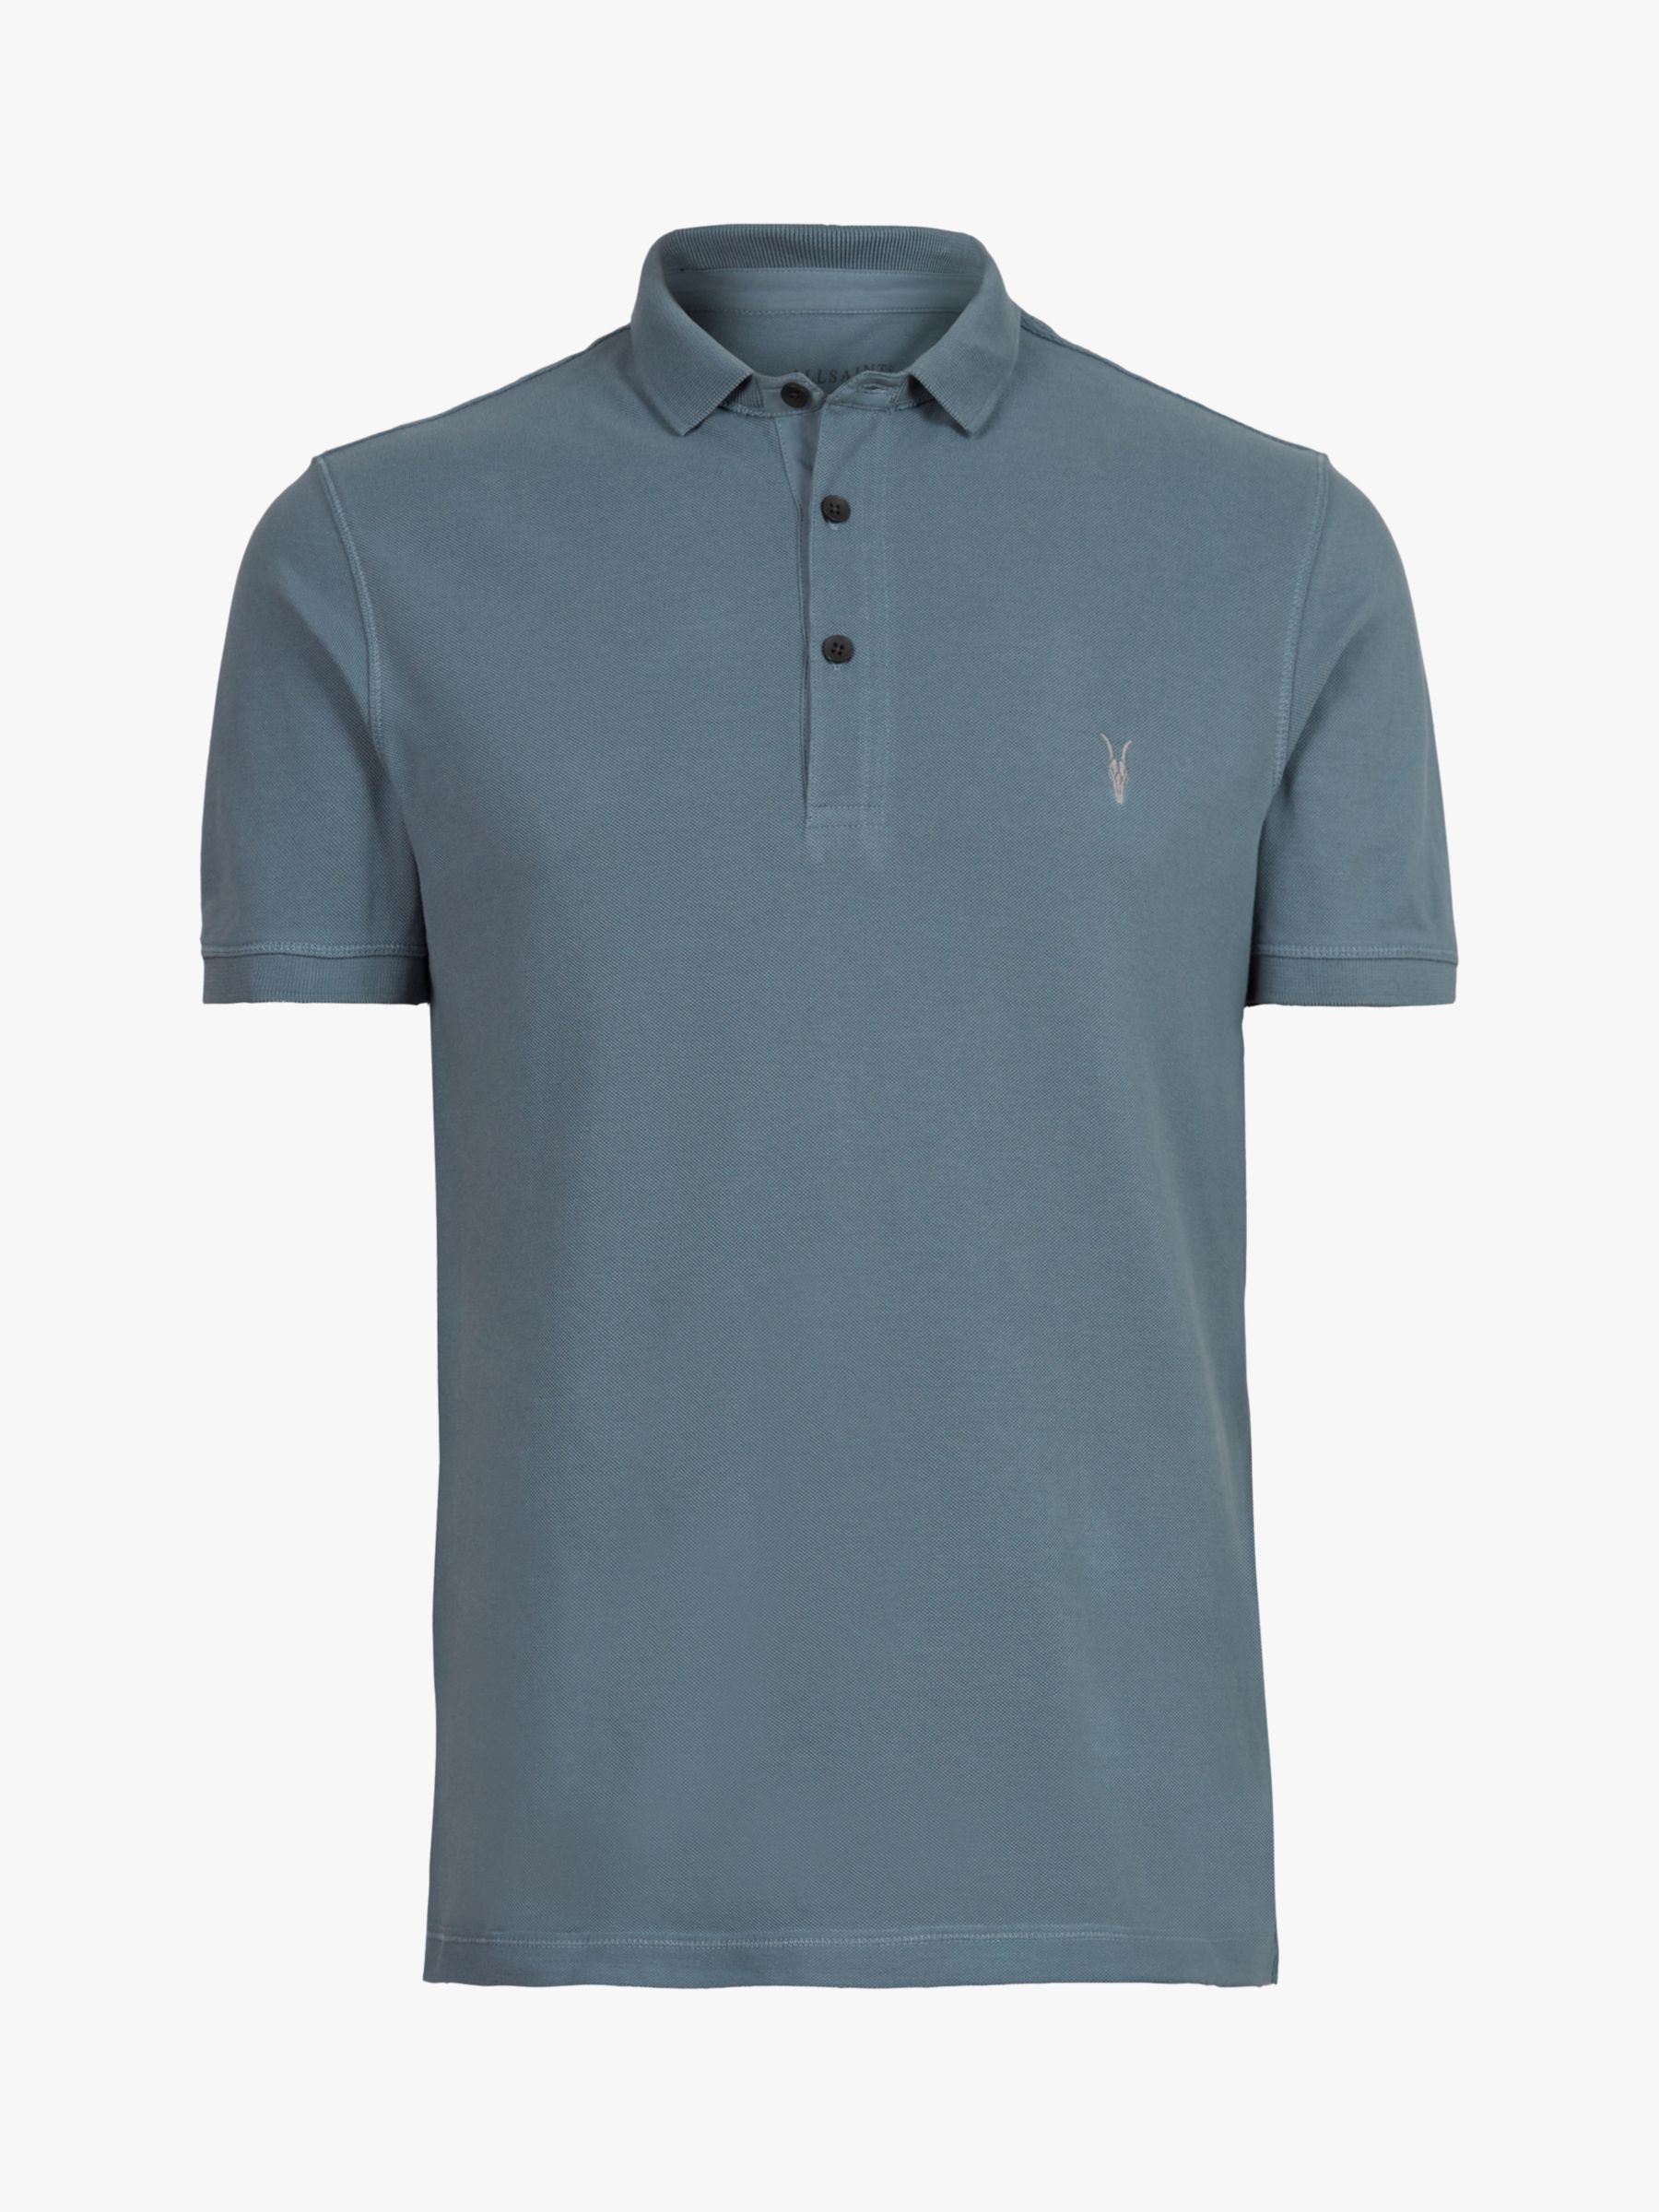 AllSaints Reform Short Sleeve Polo Top, Aged Blue at John Lewis & Partners